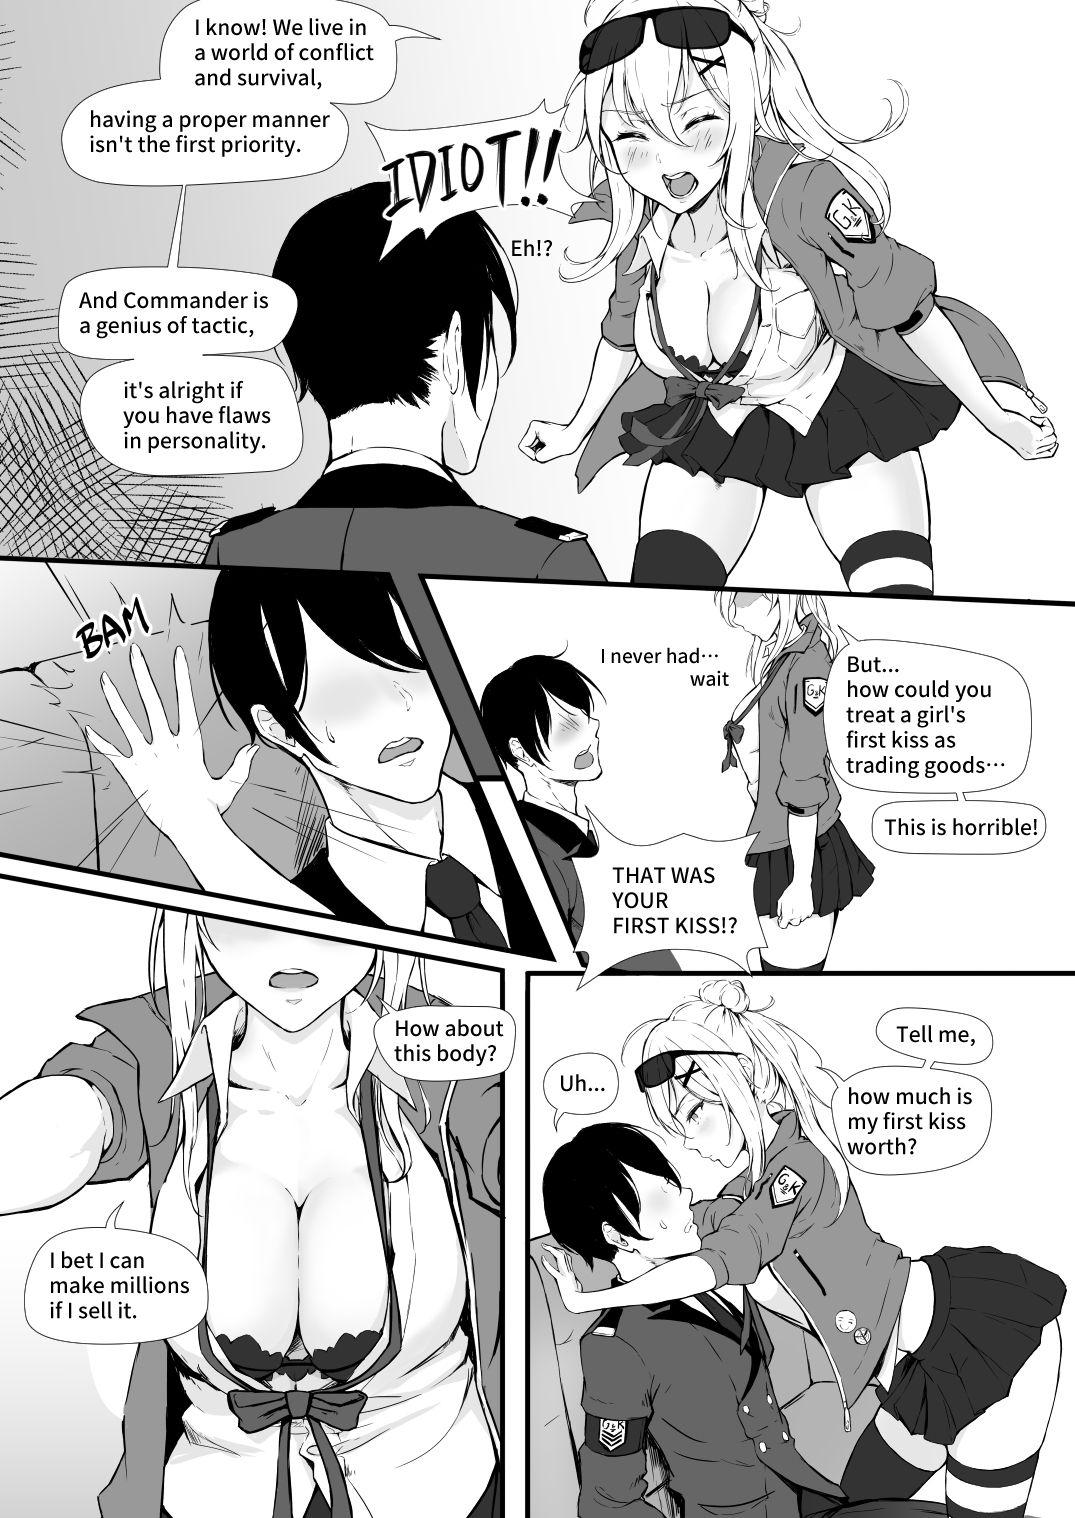 Ass Fuck How Many Diamonds a Kiss Worth? - Girls frontline Chileno - Page 9